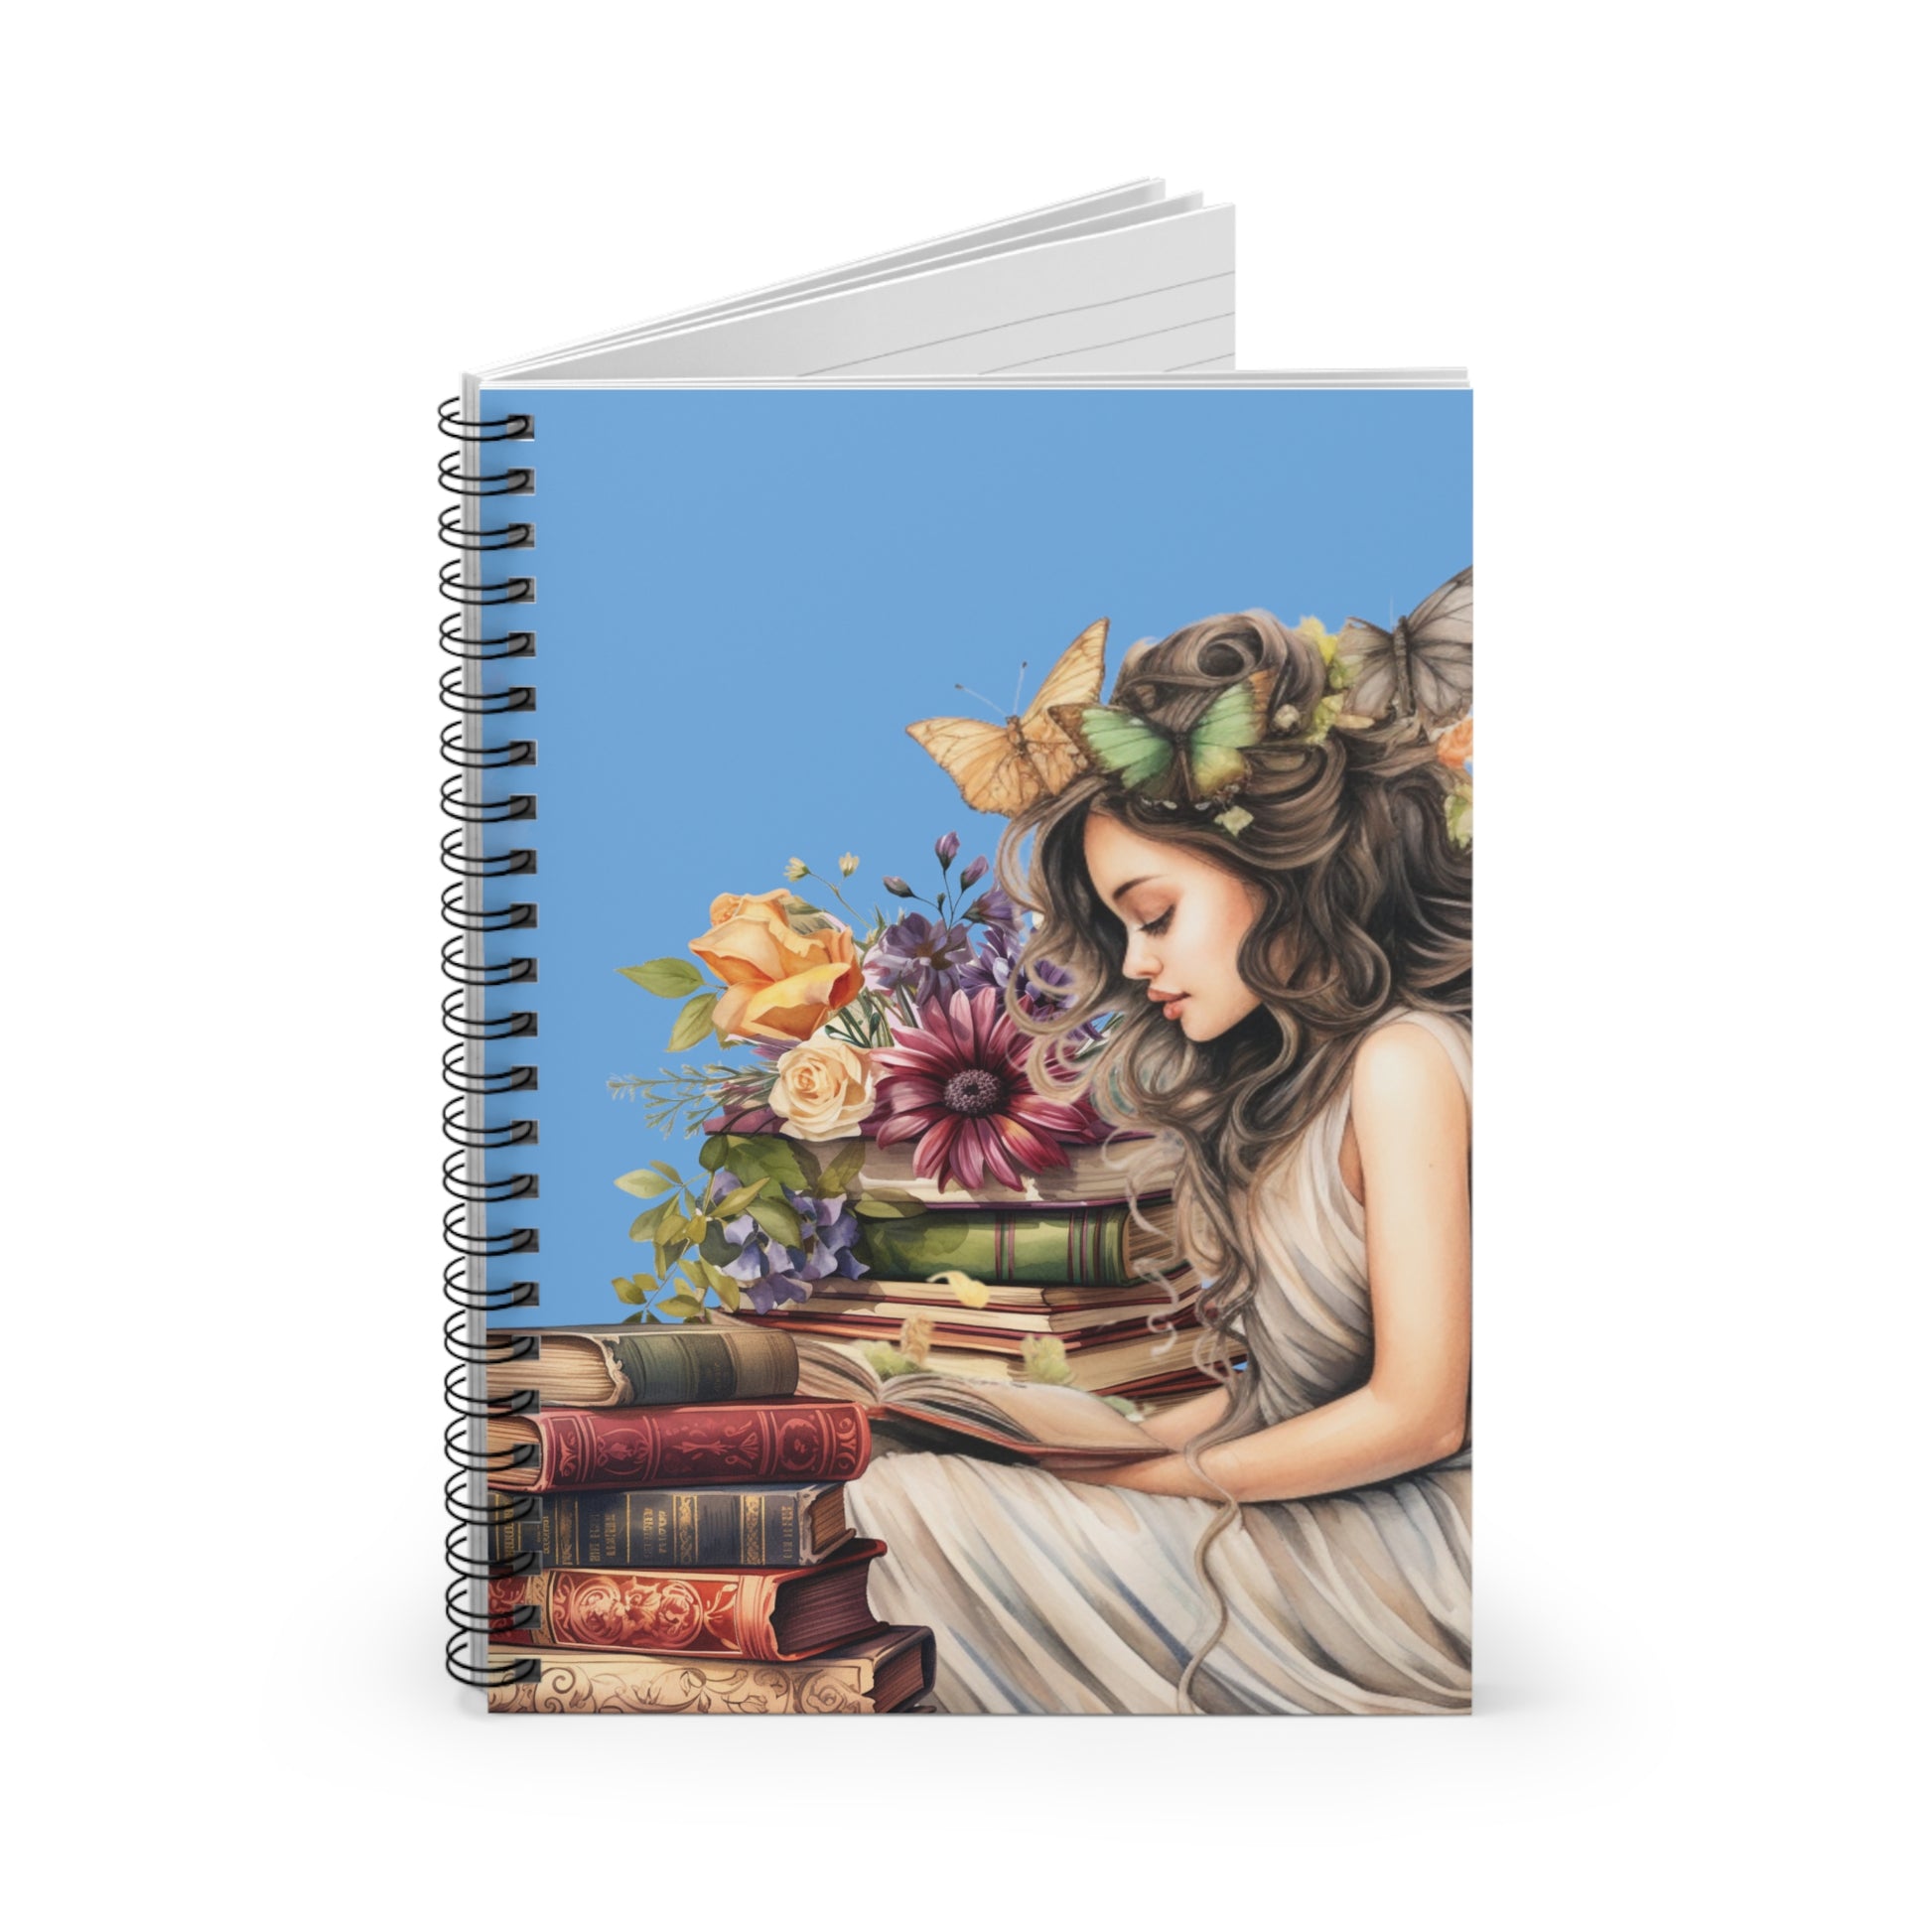 Knowledge is Power: Spiral Notebook - Log Books - Journals - Diaries - and More Custom Printed by TheGlassyLass